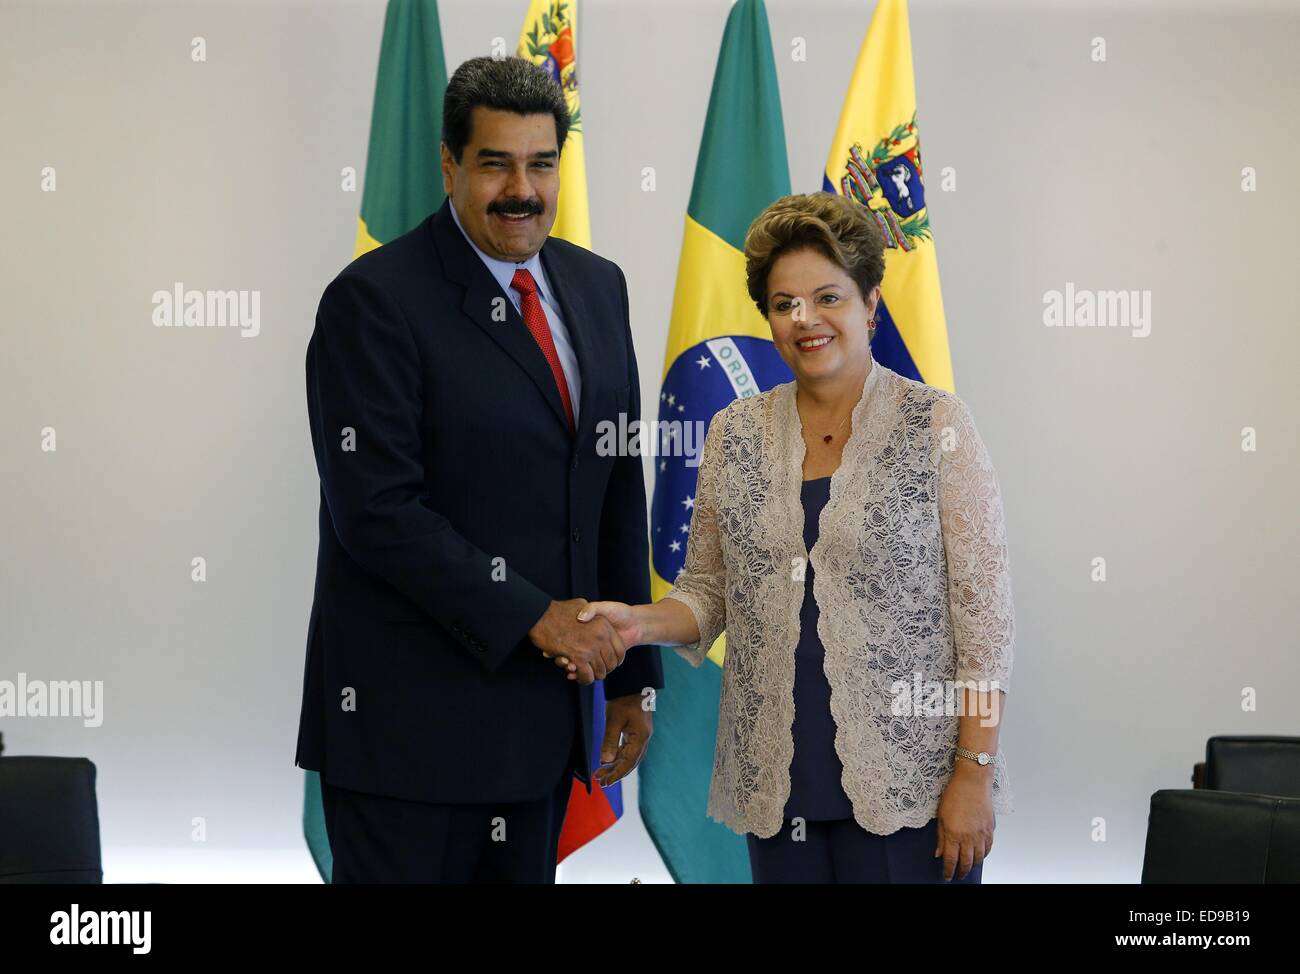 (150103) -- BRASILIA, Jan. 3, 2015 (Xinhua) -- Brazilian President Dilma Rousseff (R) meets with Venezuelan President Nicolas Maduro at the Planalto Palace in Brasilia, capital of Brazil, on Jan. 2, 2015, a day after being sworn in for her second persidential term. (Xinhua/Dida Sampaio/AGENCIA ESTADO) (jg) (lmm) ***BRAZIL  OUT*** Stock Photo